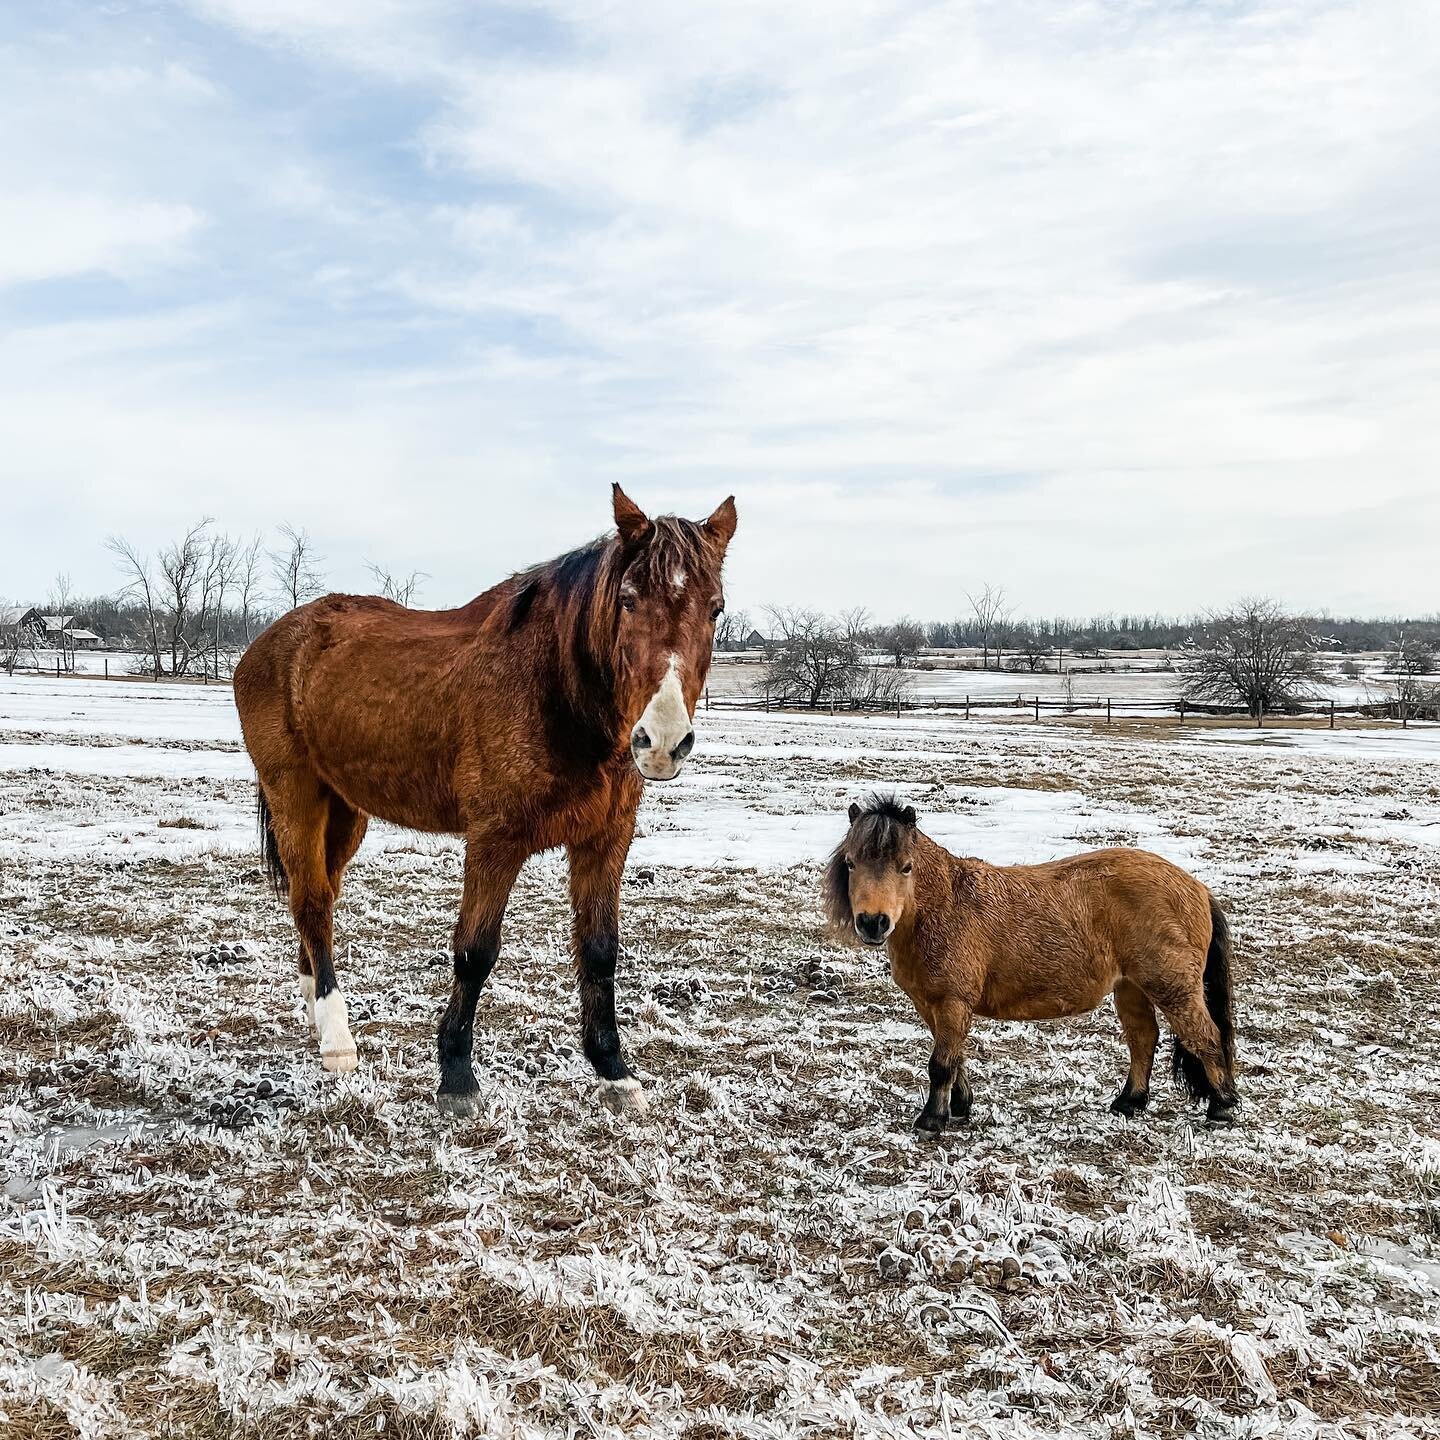 Lousy Smarch weather 🥶 the generator is currently the hardest working member on the farm! #readyforspring #theBayfield #Nanniepaddock #minihorse #retiredshowjumpers